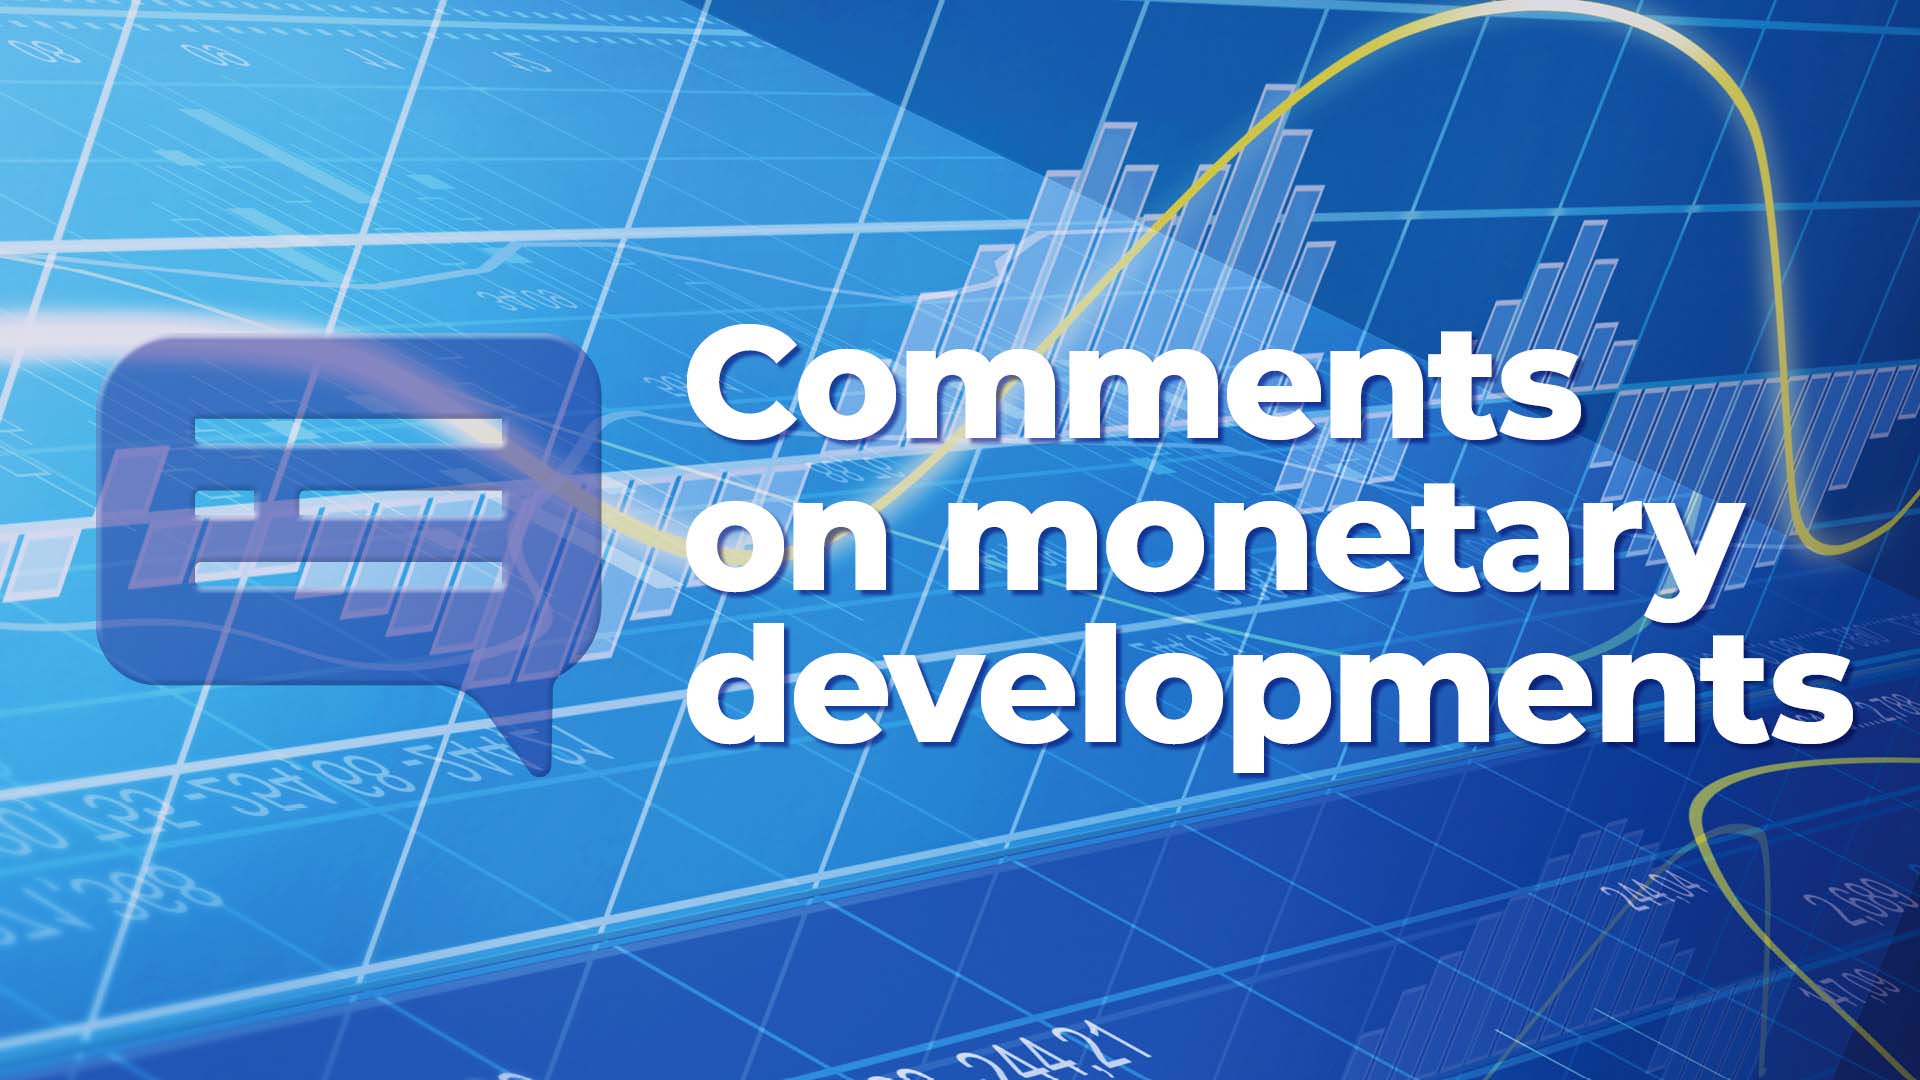 Comments on monetary developments for October 2022